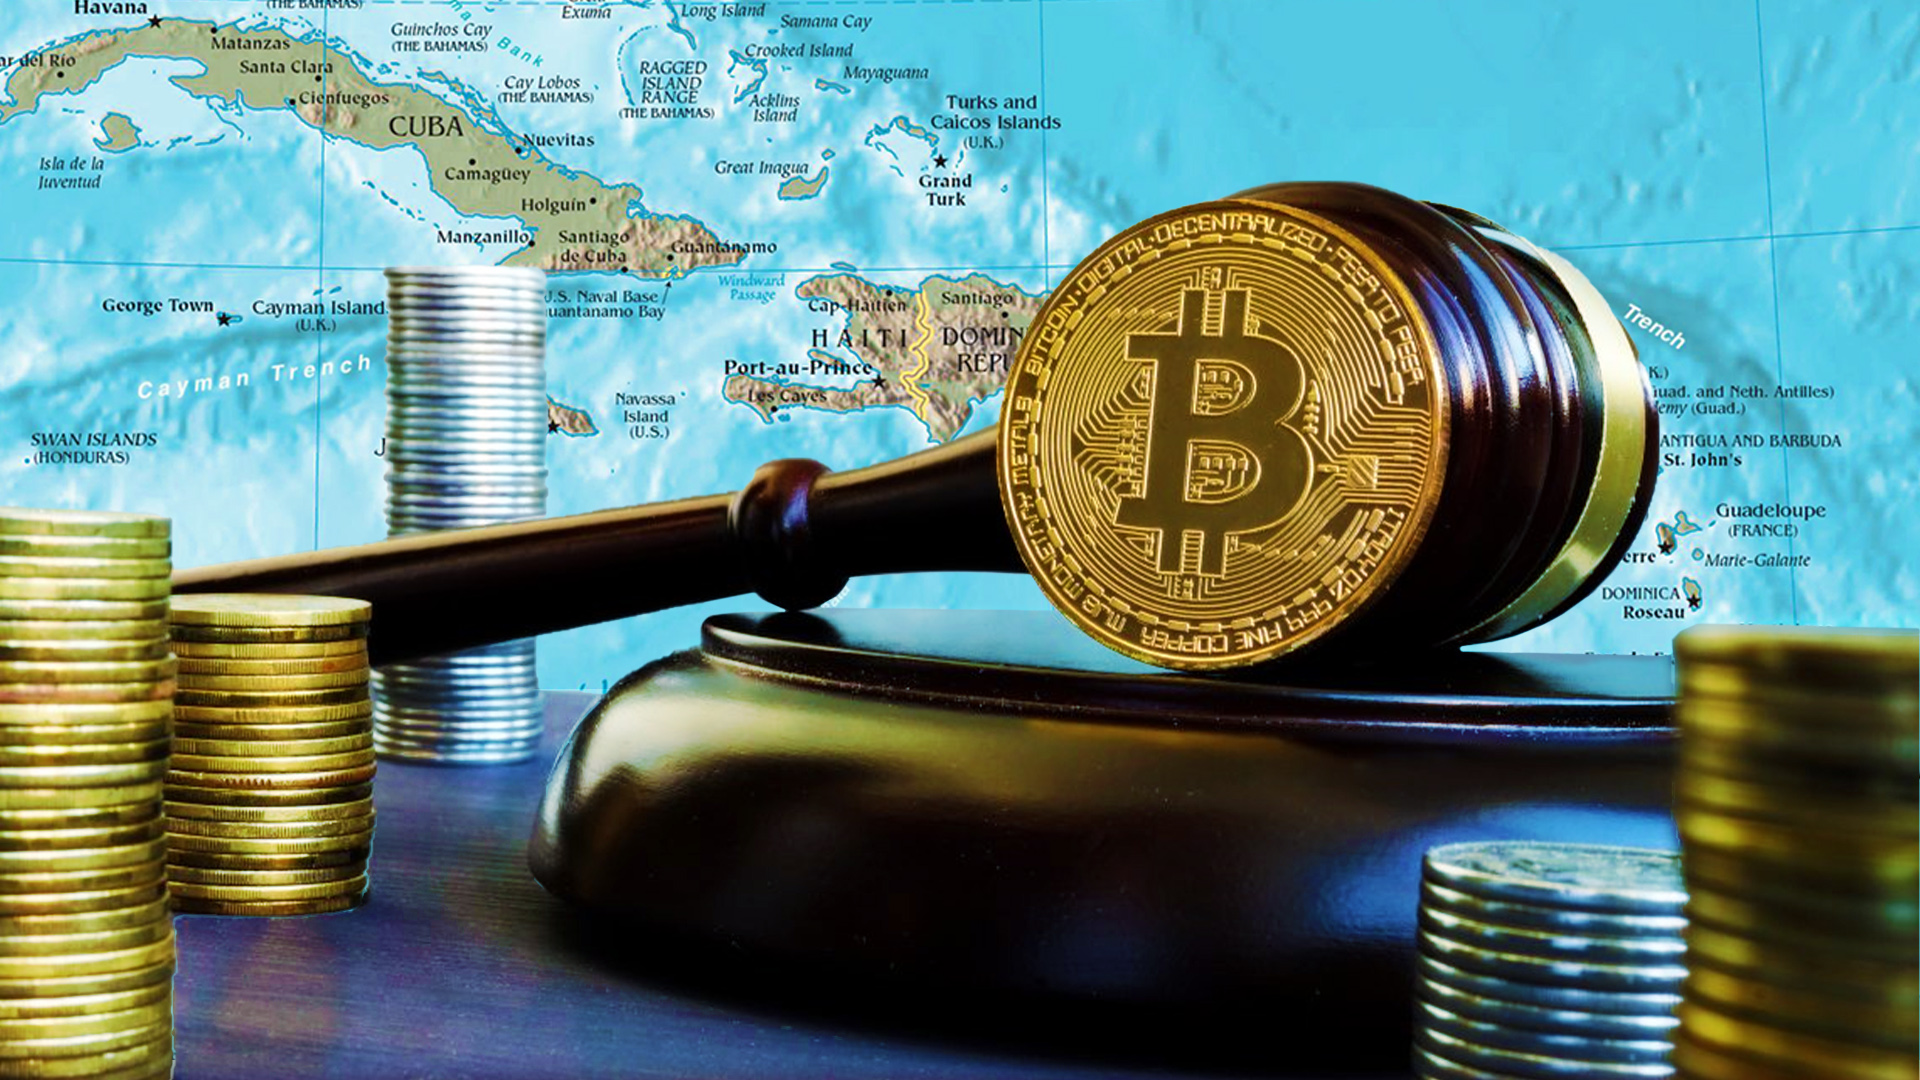 Cryptocurrencies Regulations in The Caribbean